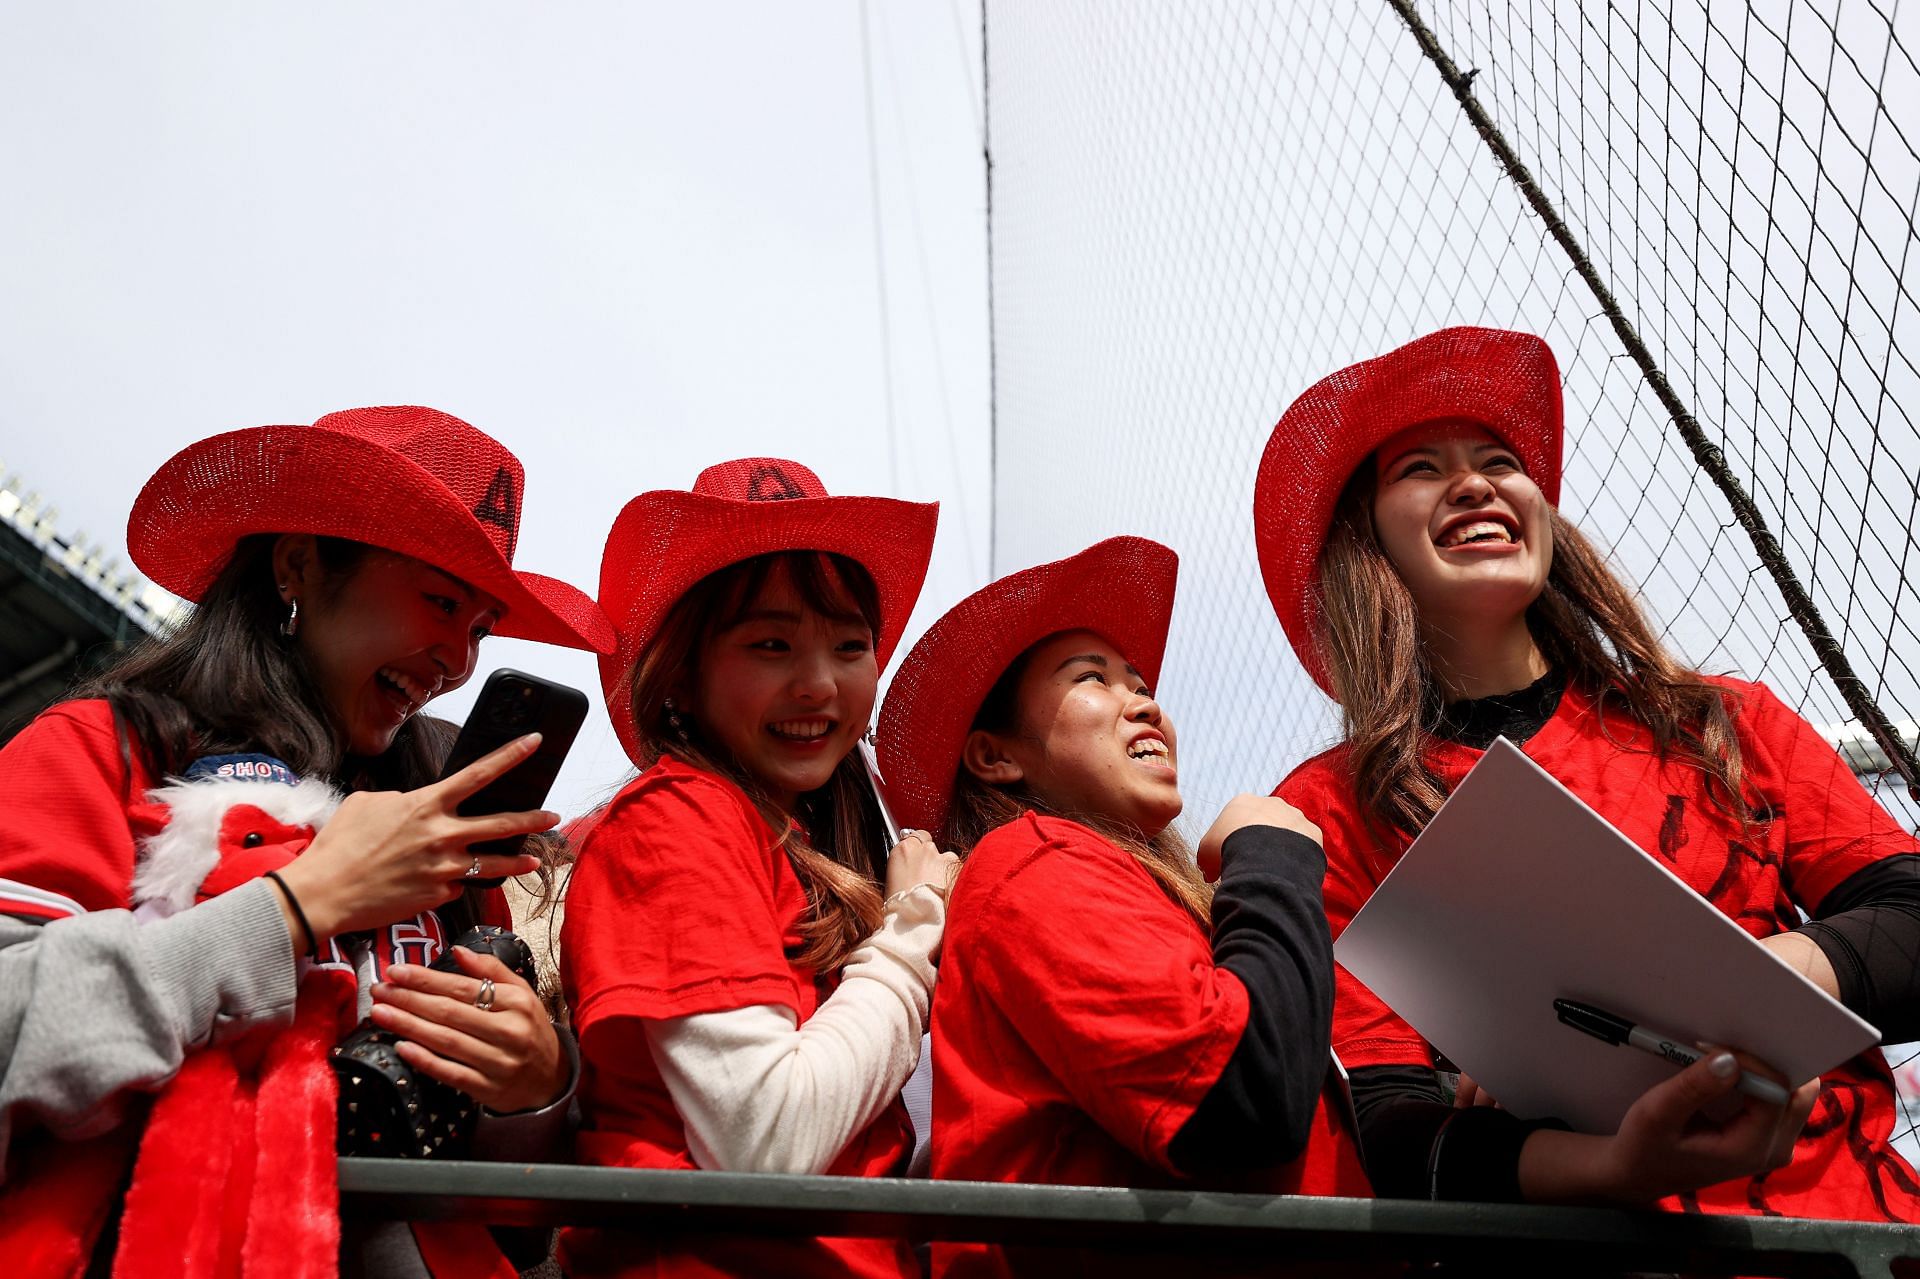 Fans cheer for Shohei Ohtani of the Los Angeles Angels before the game against the Seattle Mariners